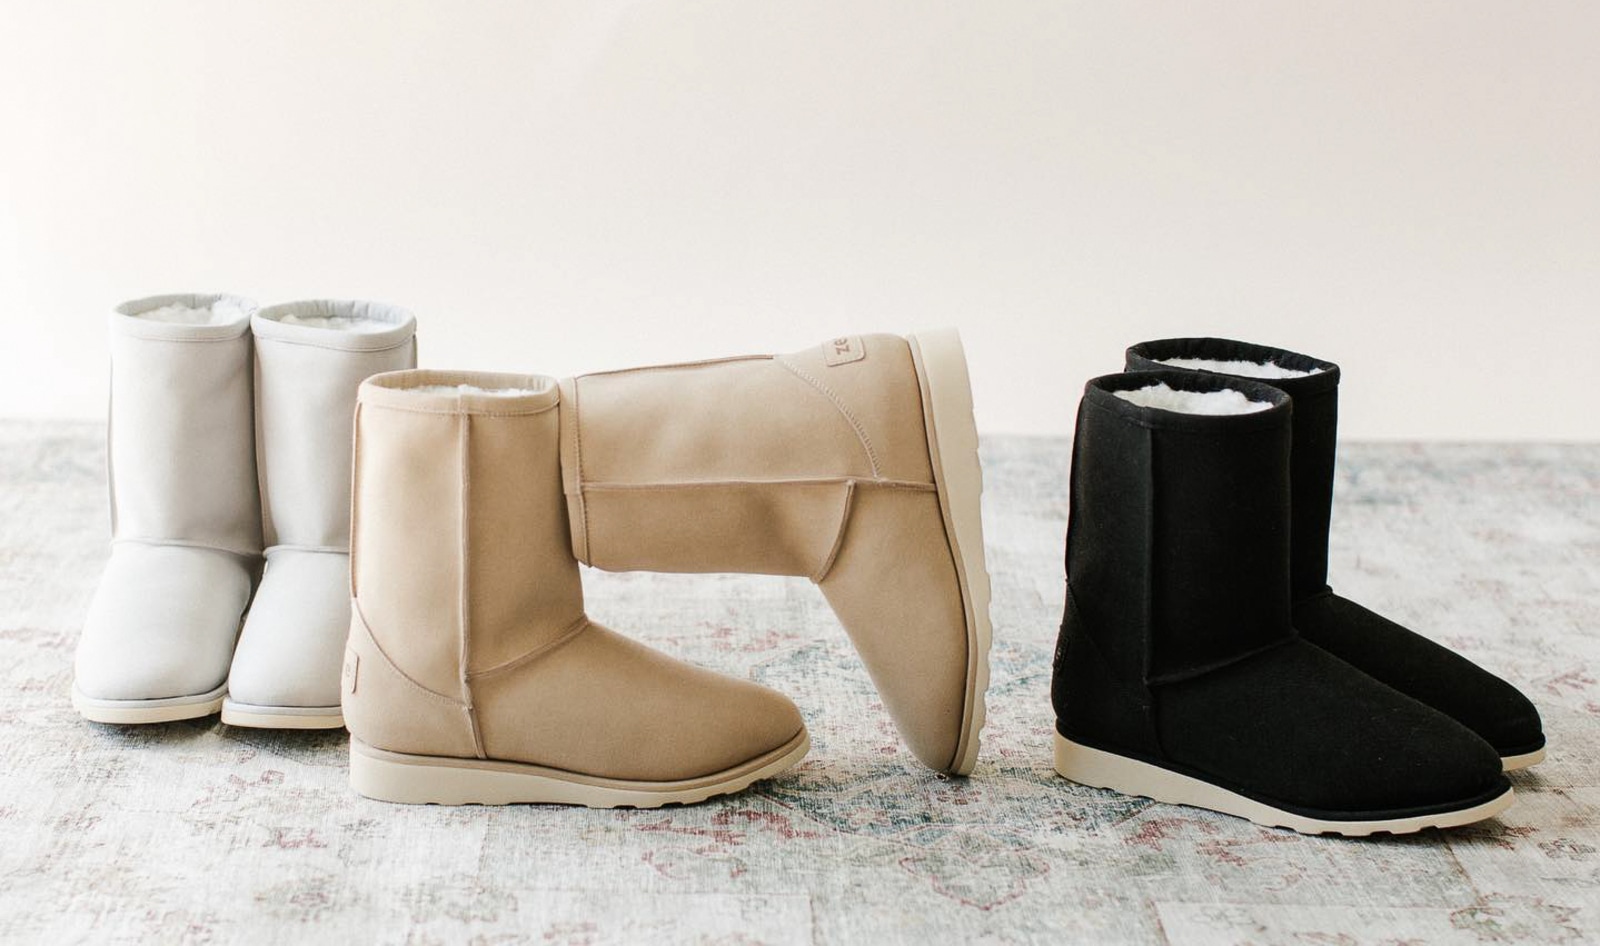 7 Vegan Ugg Boots to Keep Your Feet Comfy, Cozy, and Cruelty-Free